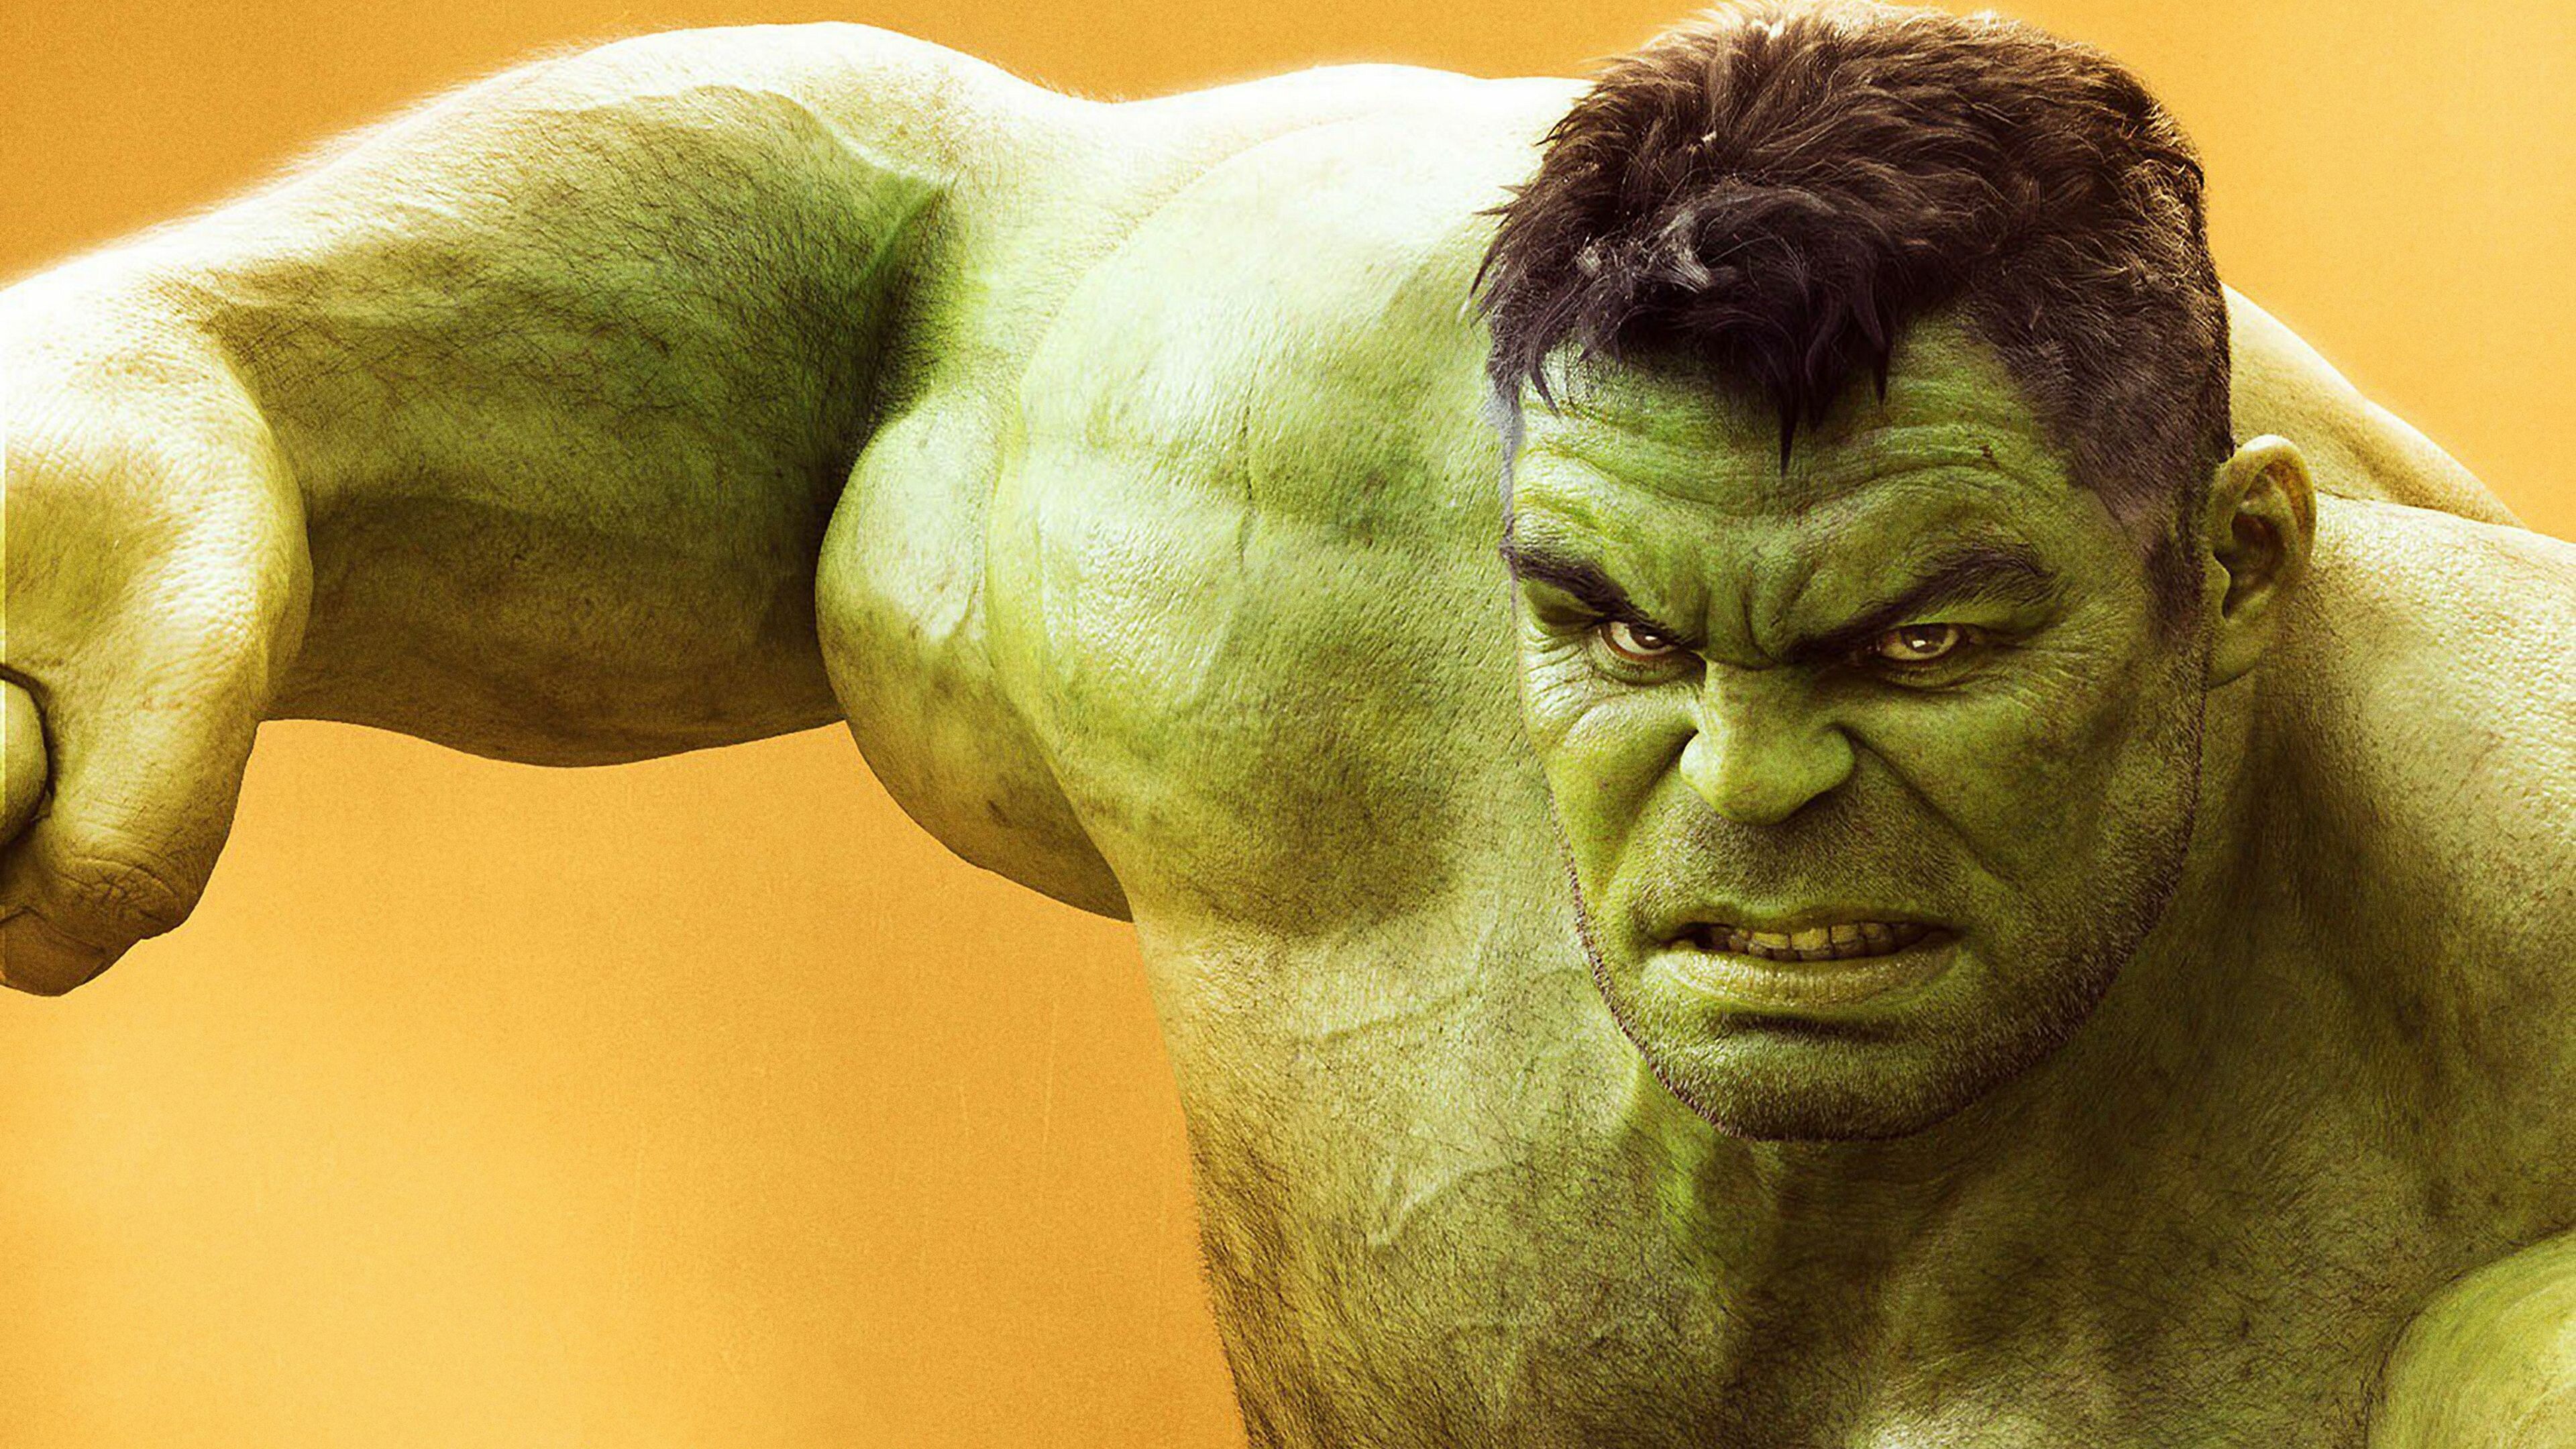 Hulk: A fictional superhero character created by writer Stan Lee and artist Jack Kirby. 3840x2160 4K Wallpaper.